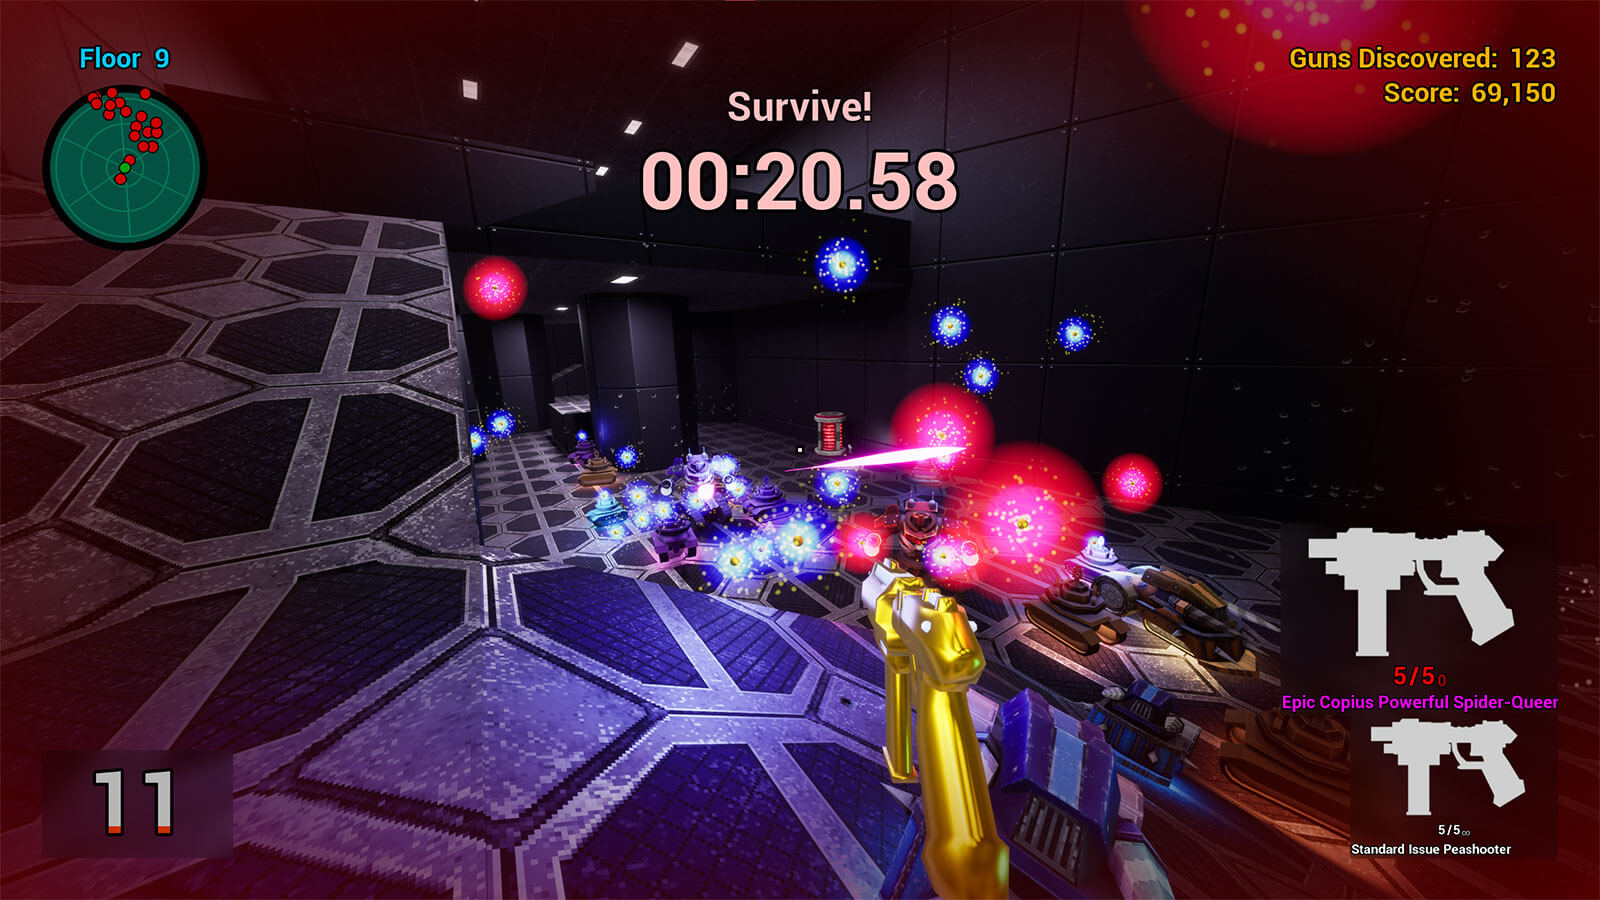 Enemy robots fire projectiles at the player